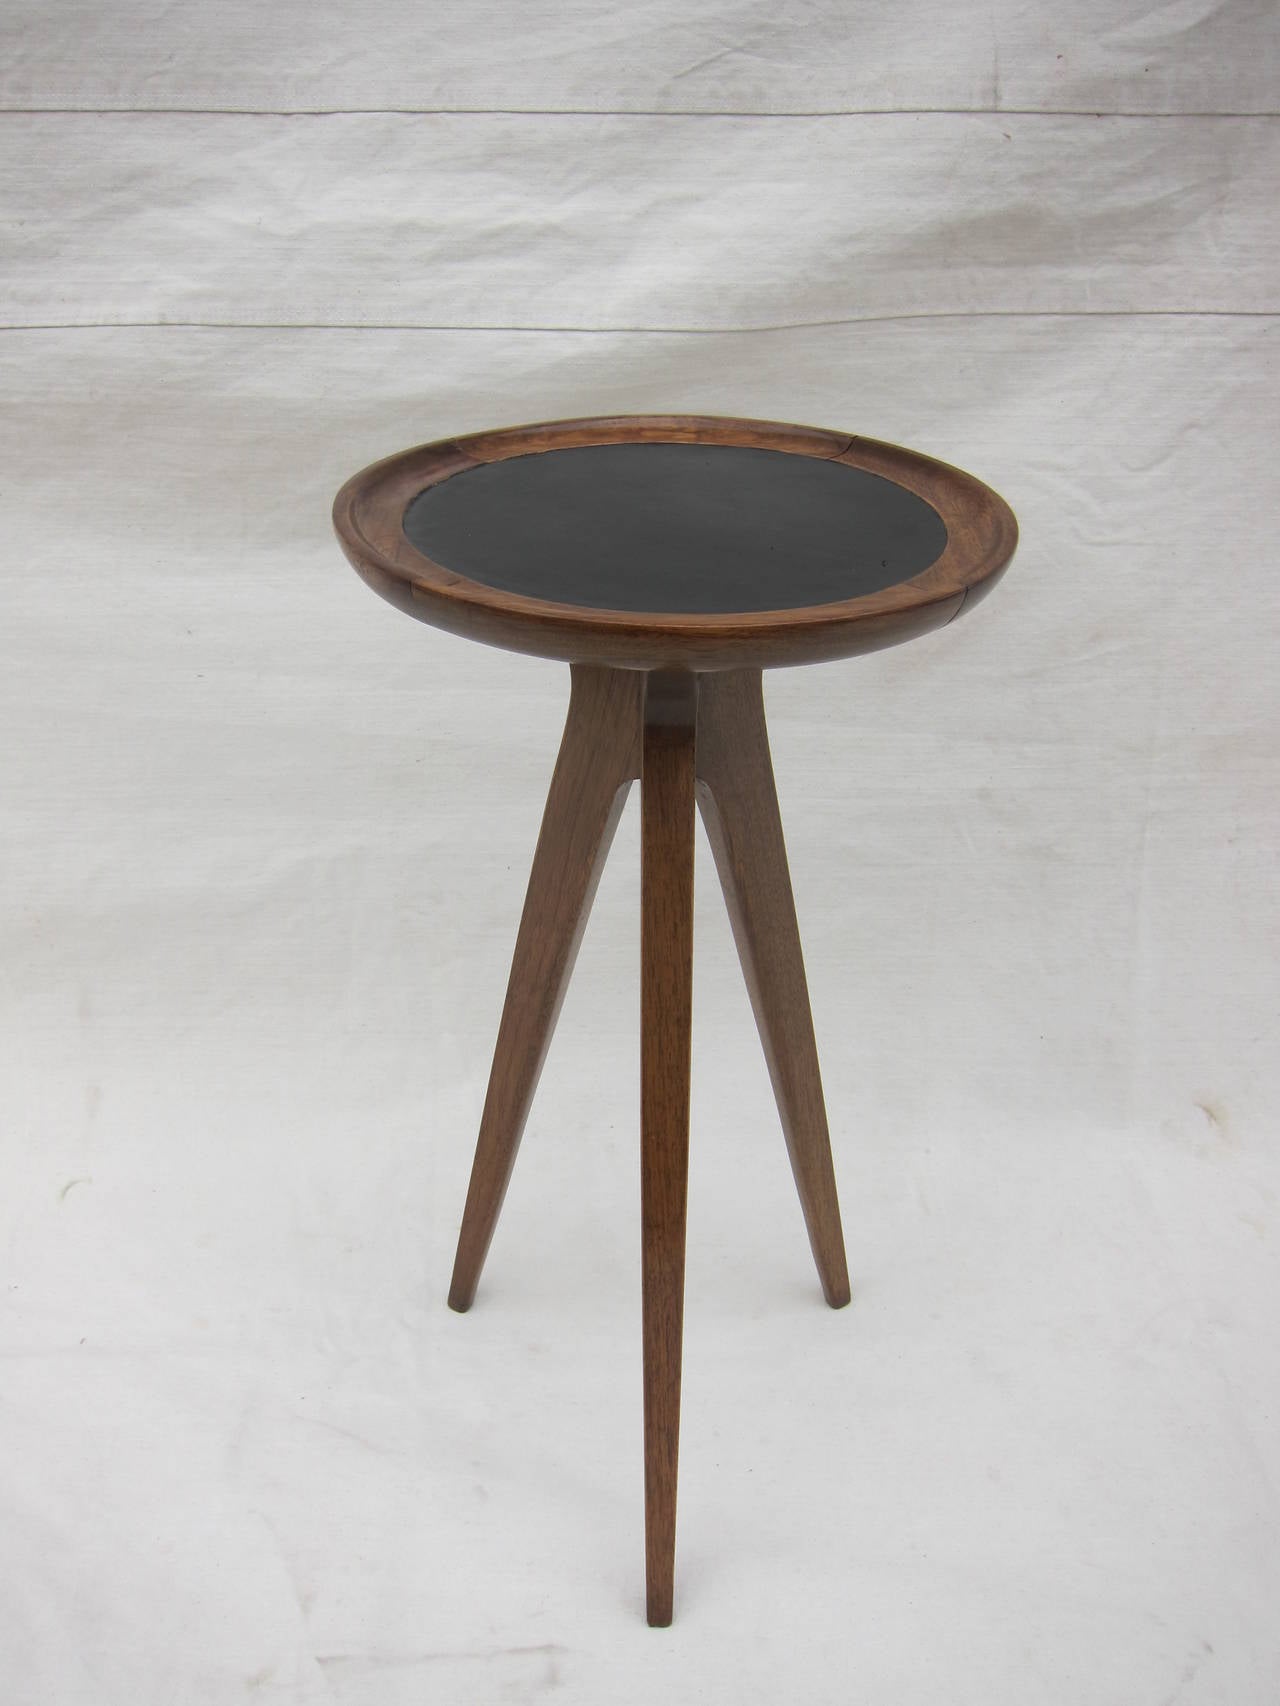 Tripod Leather Toped table by Jon Van Koert for Drexel. 
Very good condition.